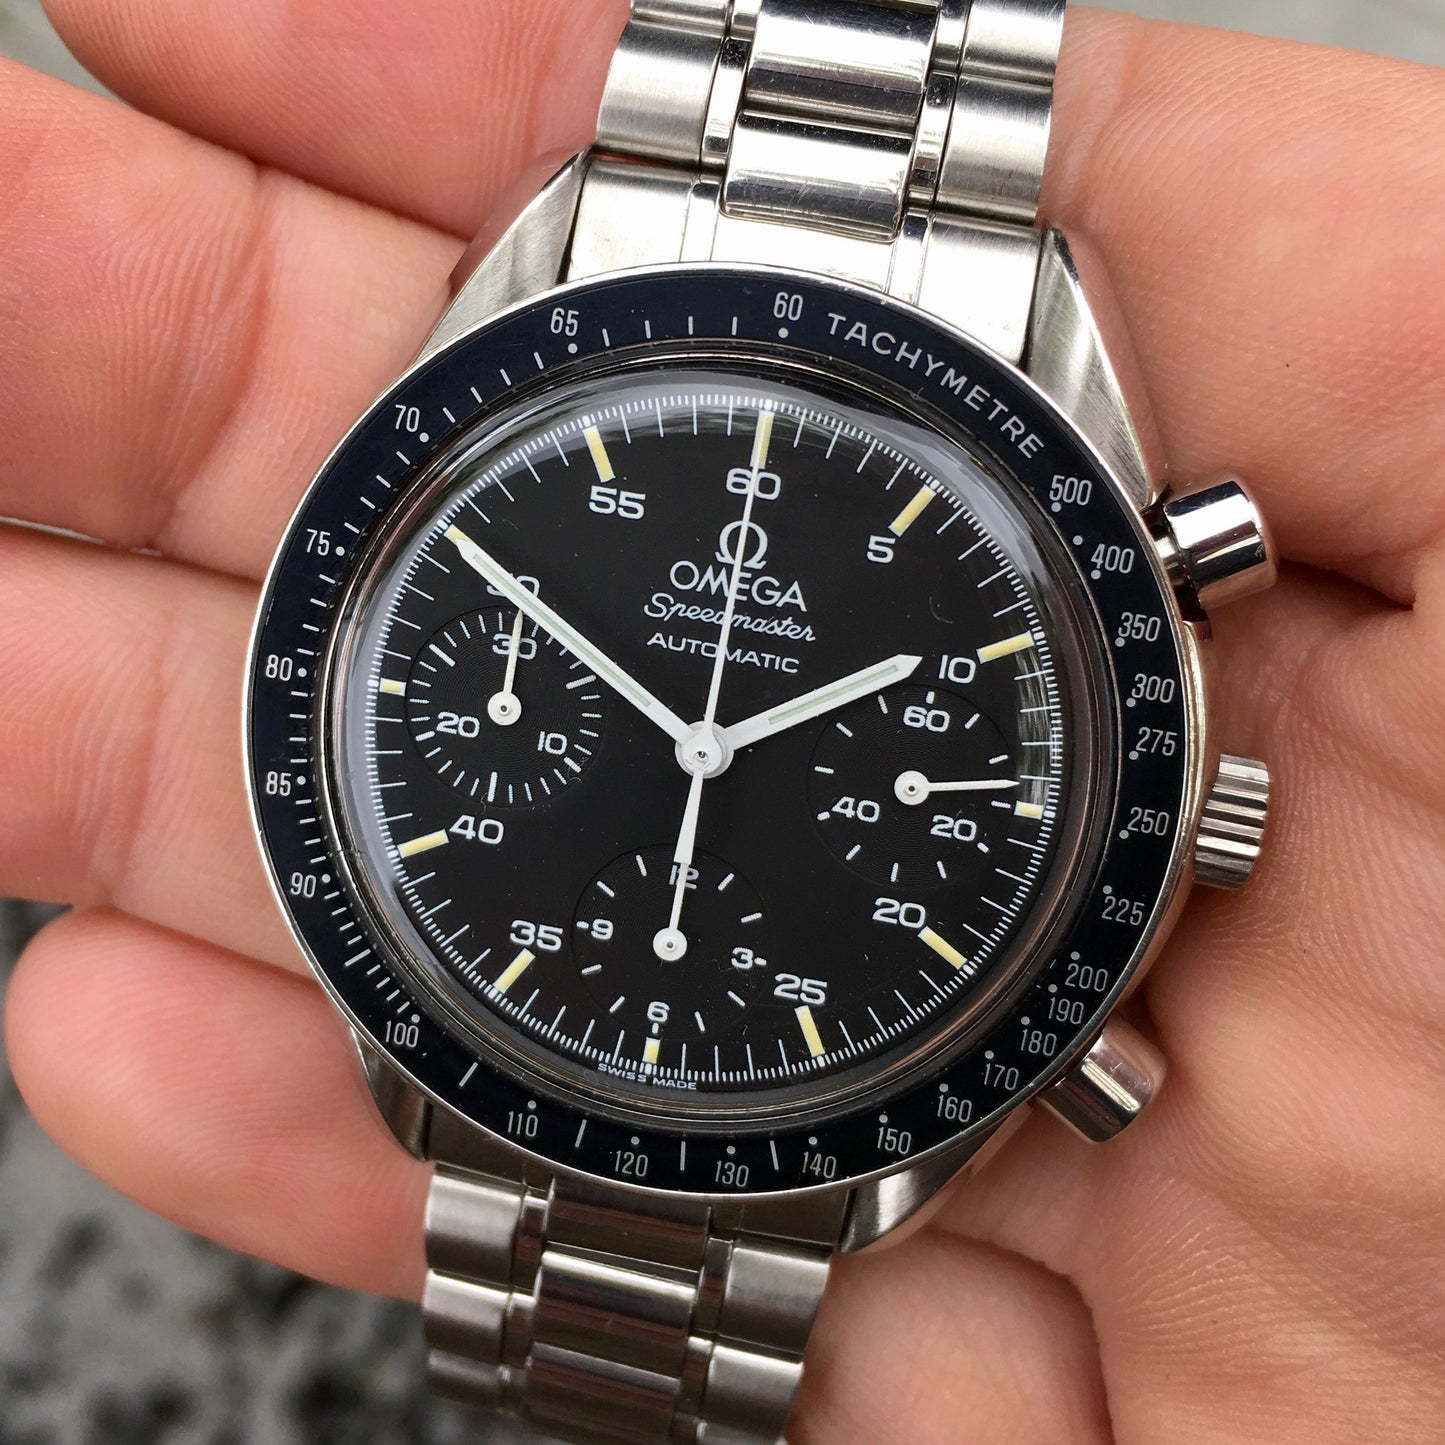 Omega Speedmaster 175.0032 Automatic Chronograph Cal. 2890 Black Dial Wristwatch - Hashtag Watch Company